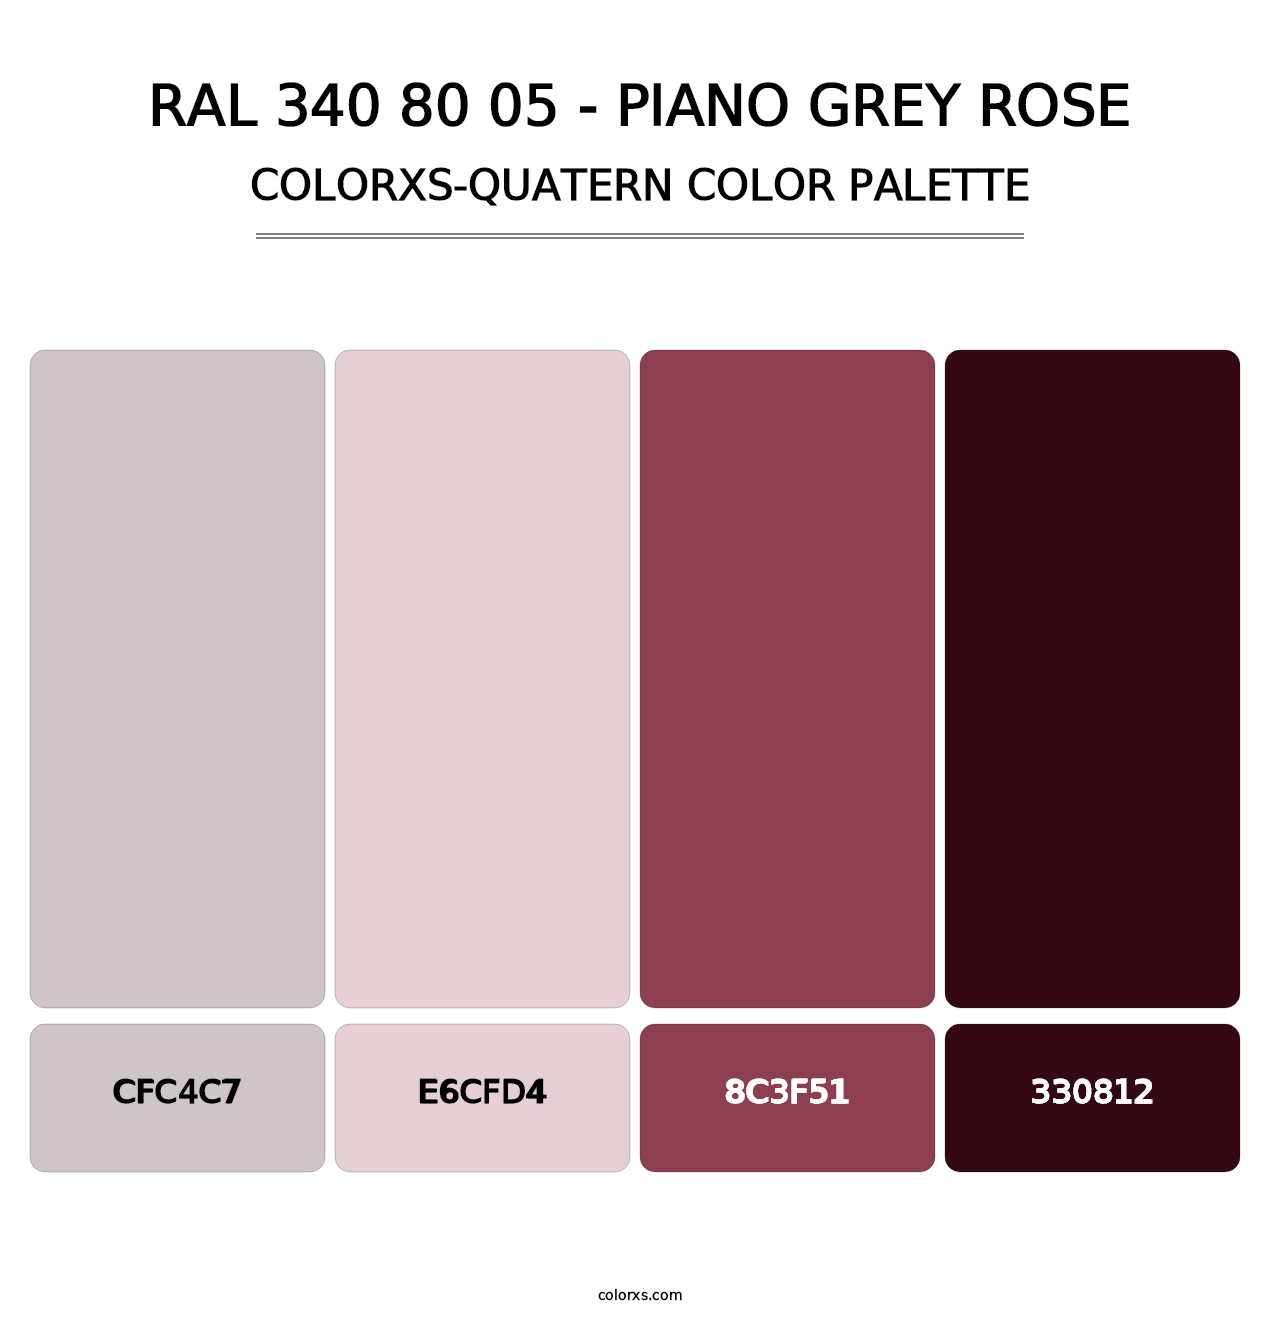 RAL 340 80 05 - Piano Grey Rose - Colorxs Quatern Palette